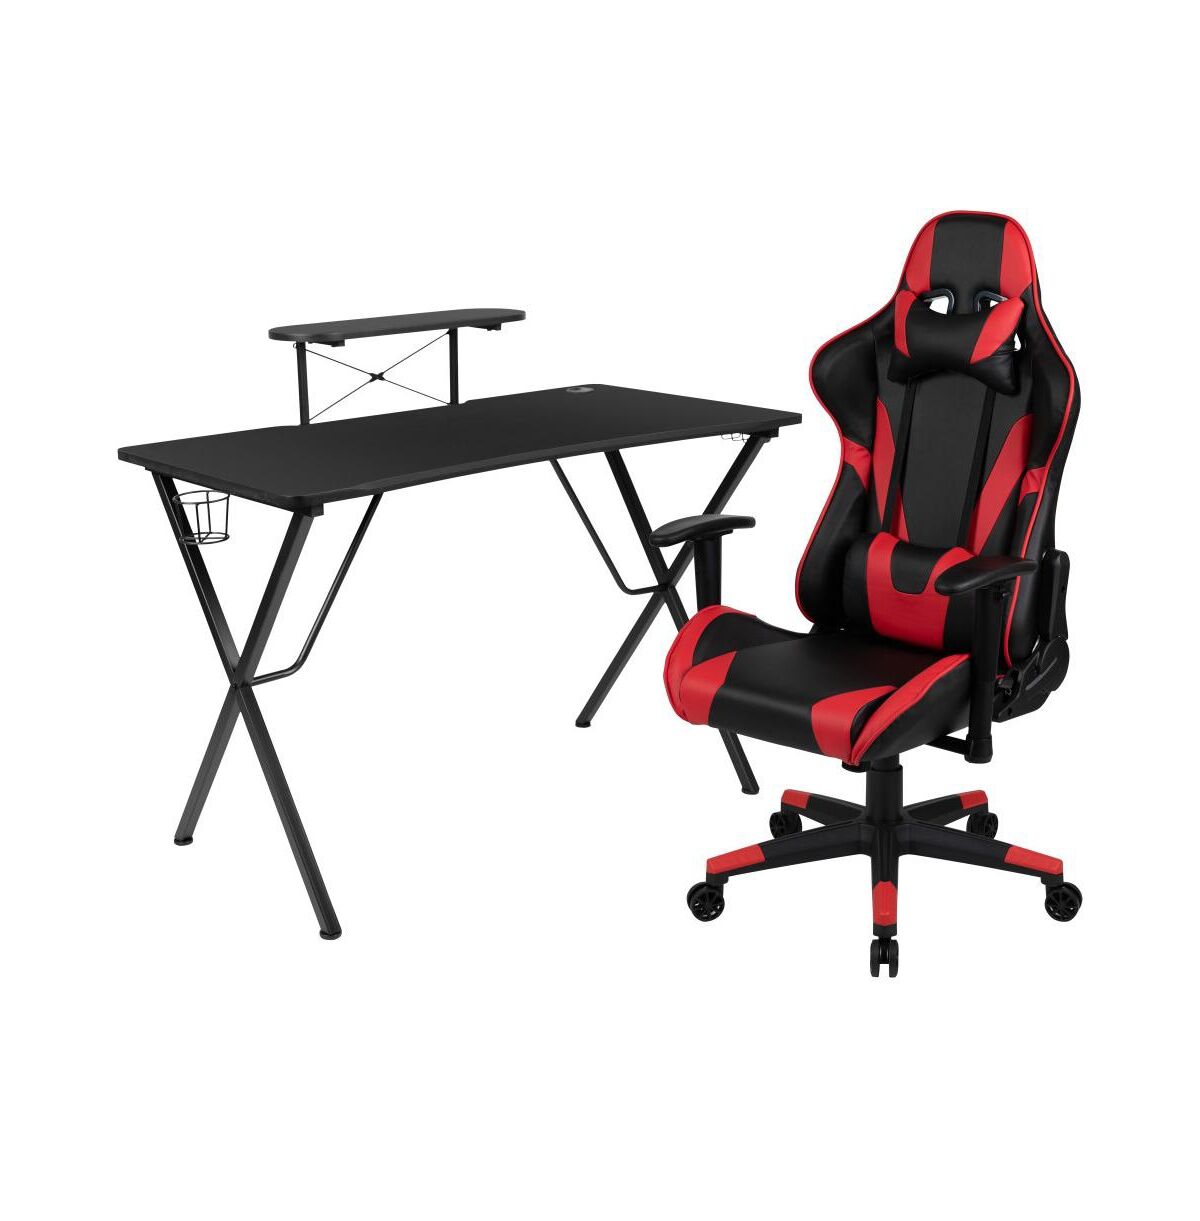 Emma+oliver Gaming Desk & Chair Set - Cup Holder, Headphone Hook, And Monitor Stand - Red